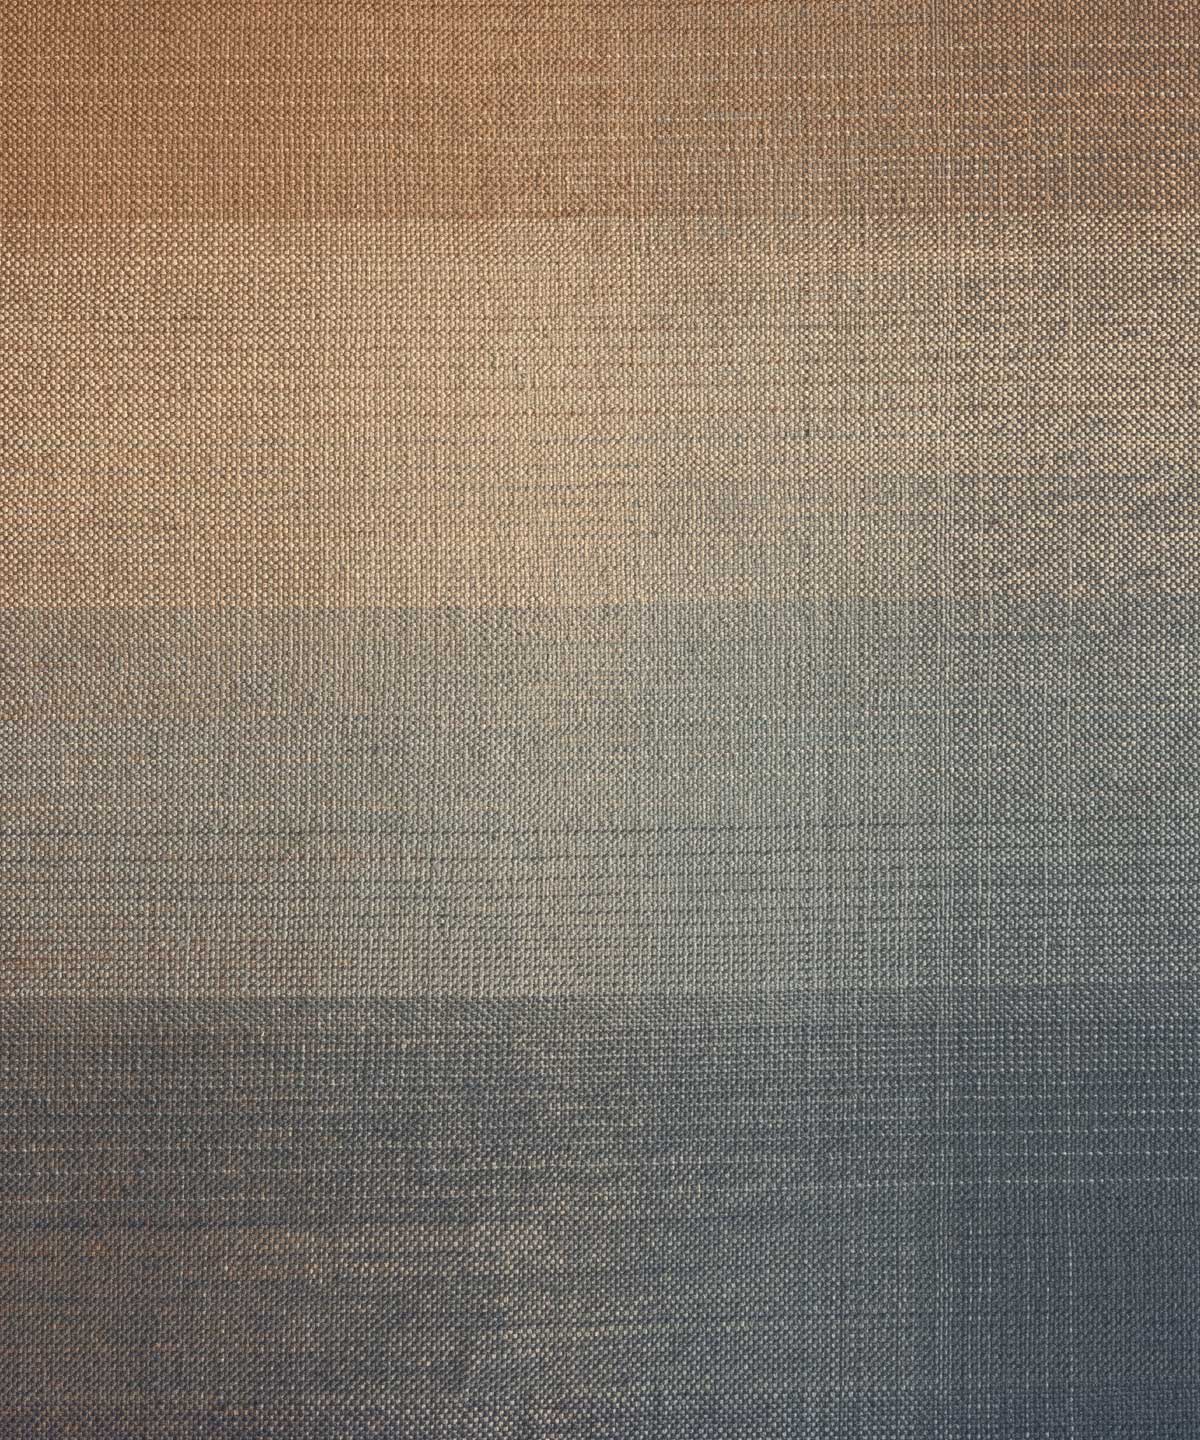 Shade Outdoor Rug in Palette 2